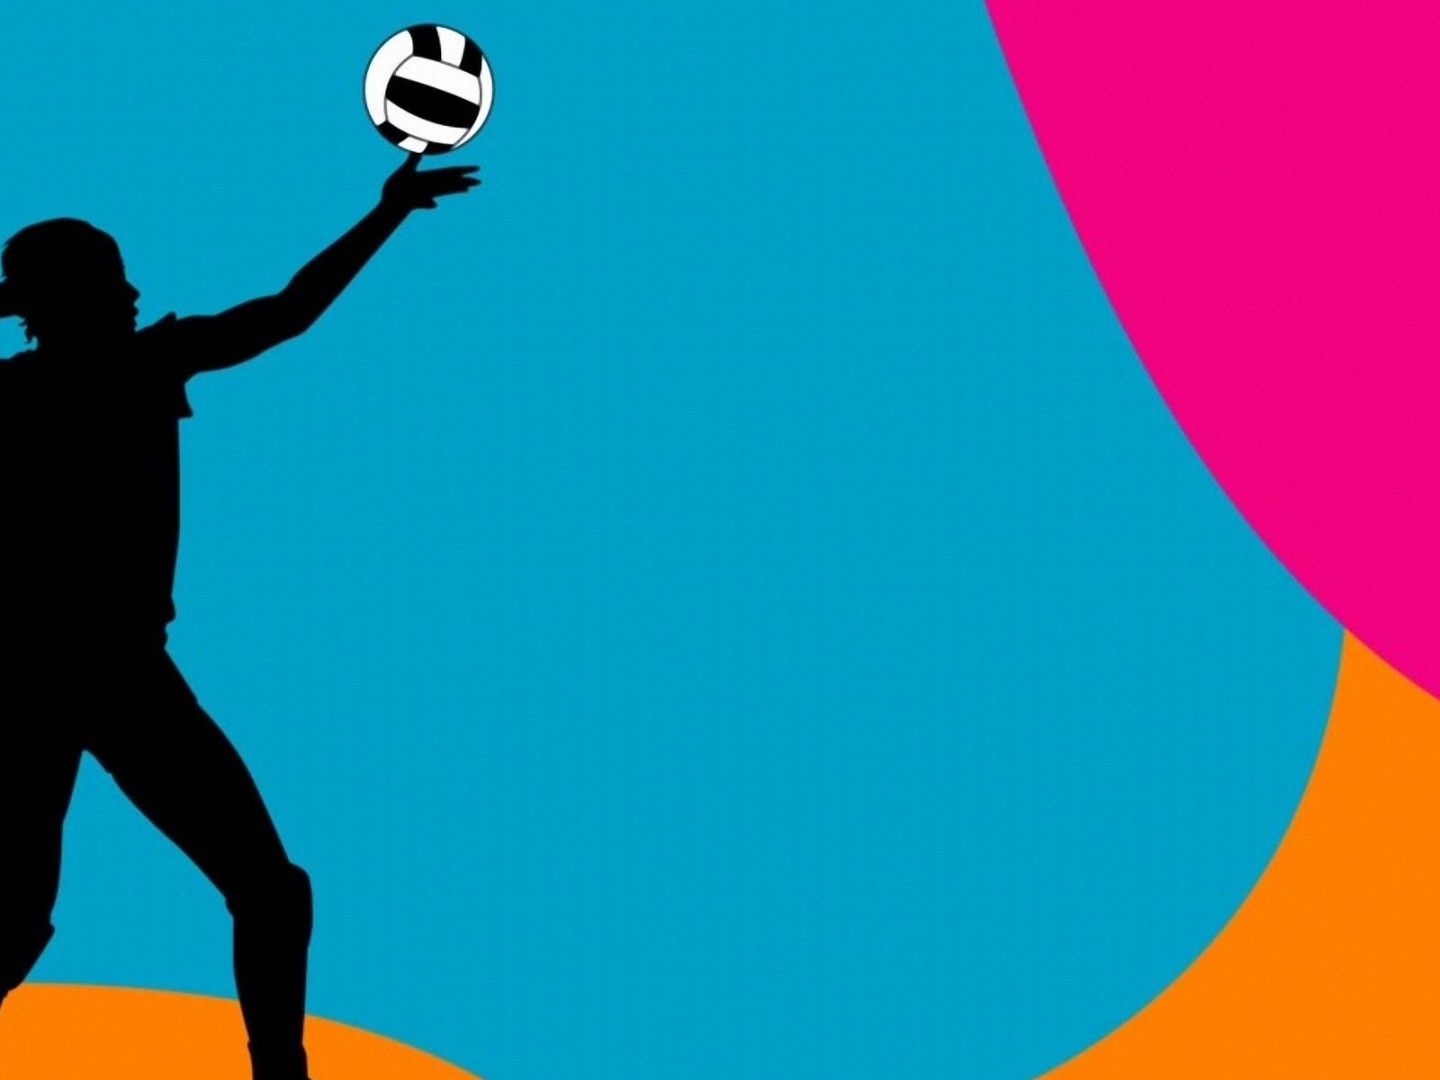 Colorful Volleyball Background Image